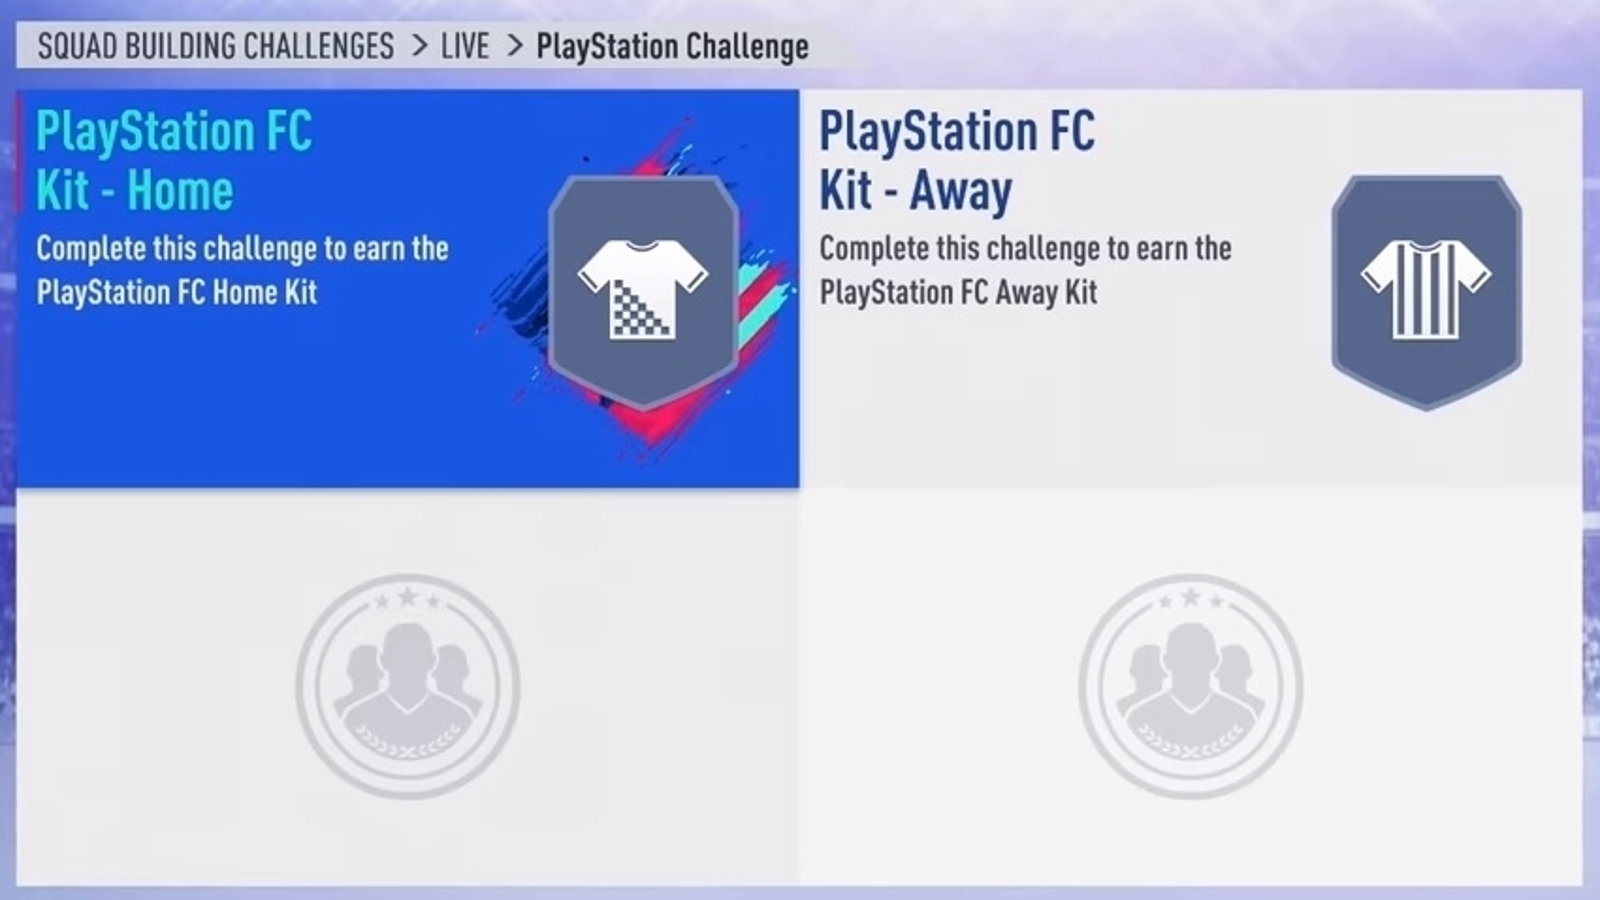 EA simply does not care: Fans react as problems with SBCs